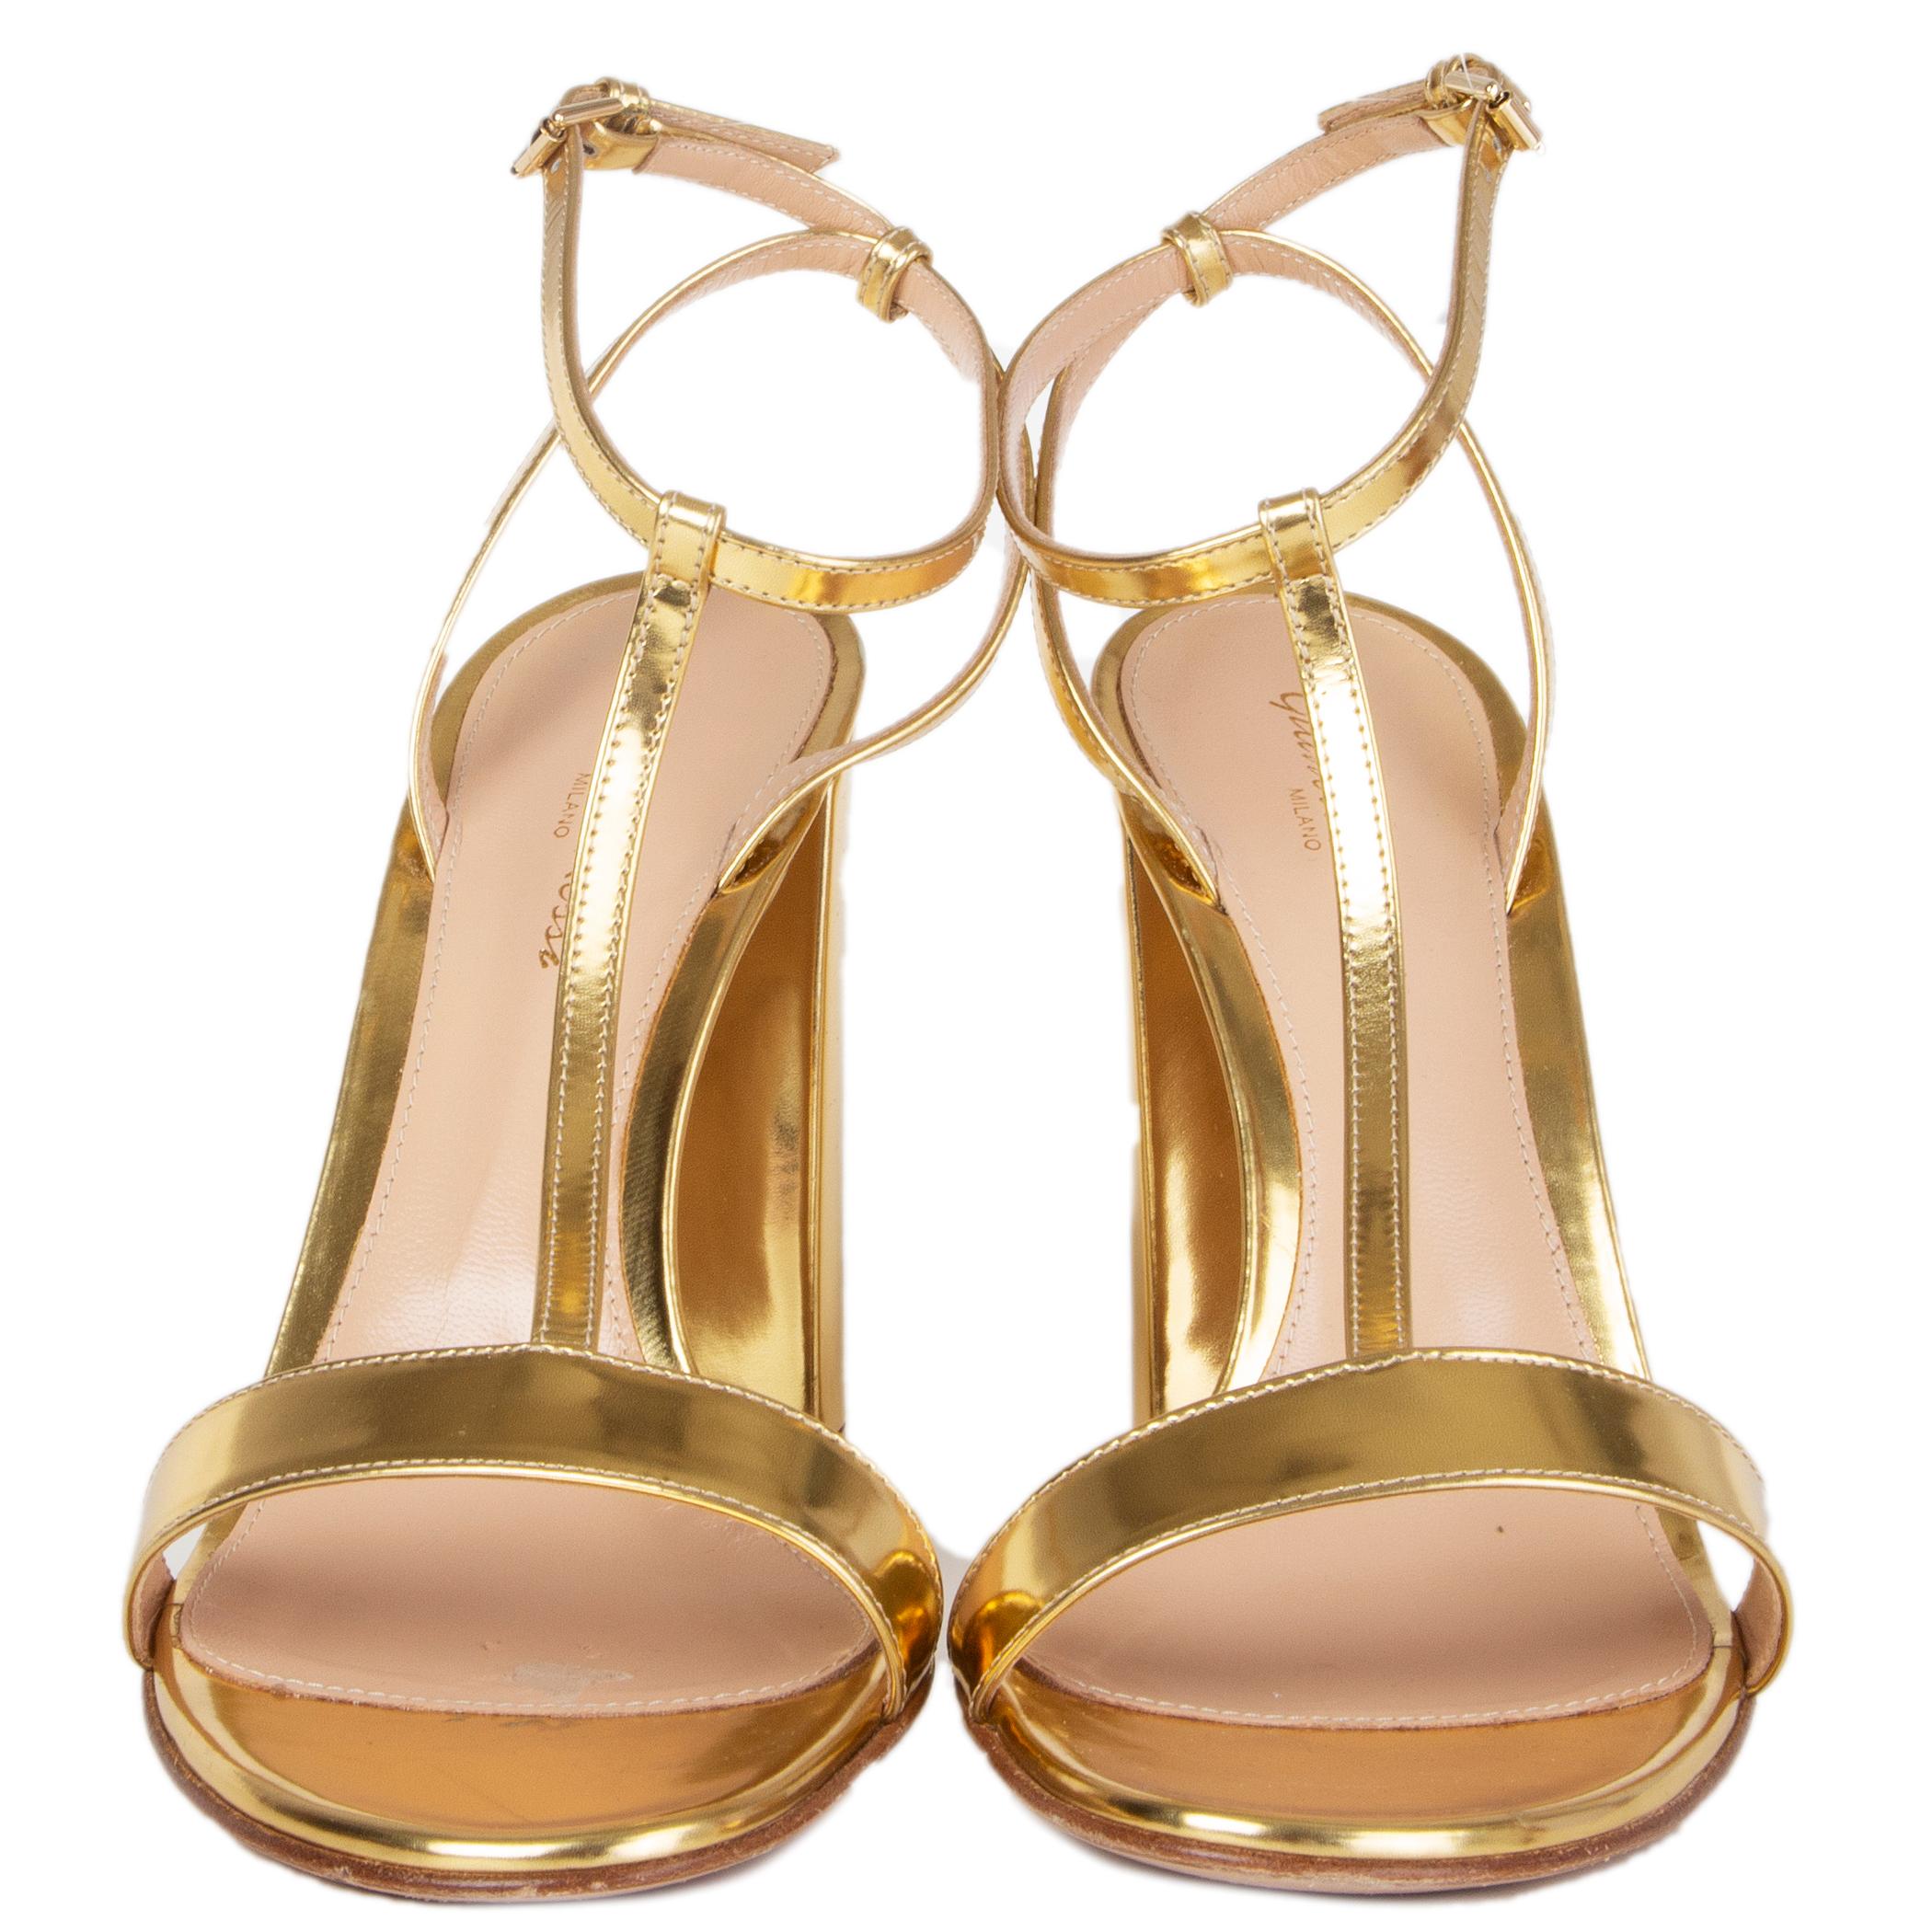 100% authentic Gianvito Rossi ankle-strap sandals in metallic gold-tone calfskin. Have been worn once with a faint scratch on the left heel and a mark on the inside sole of the right heel from a sticky insole. Overall condition is excellent.